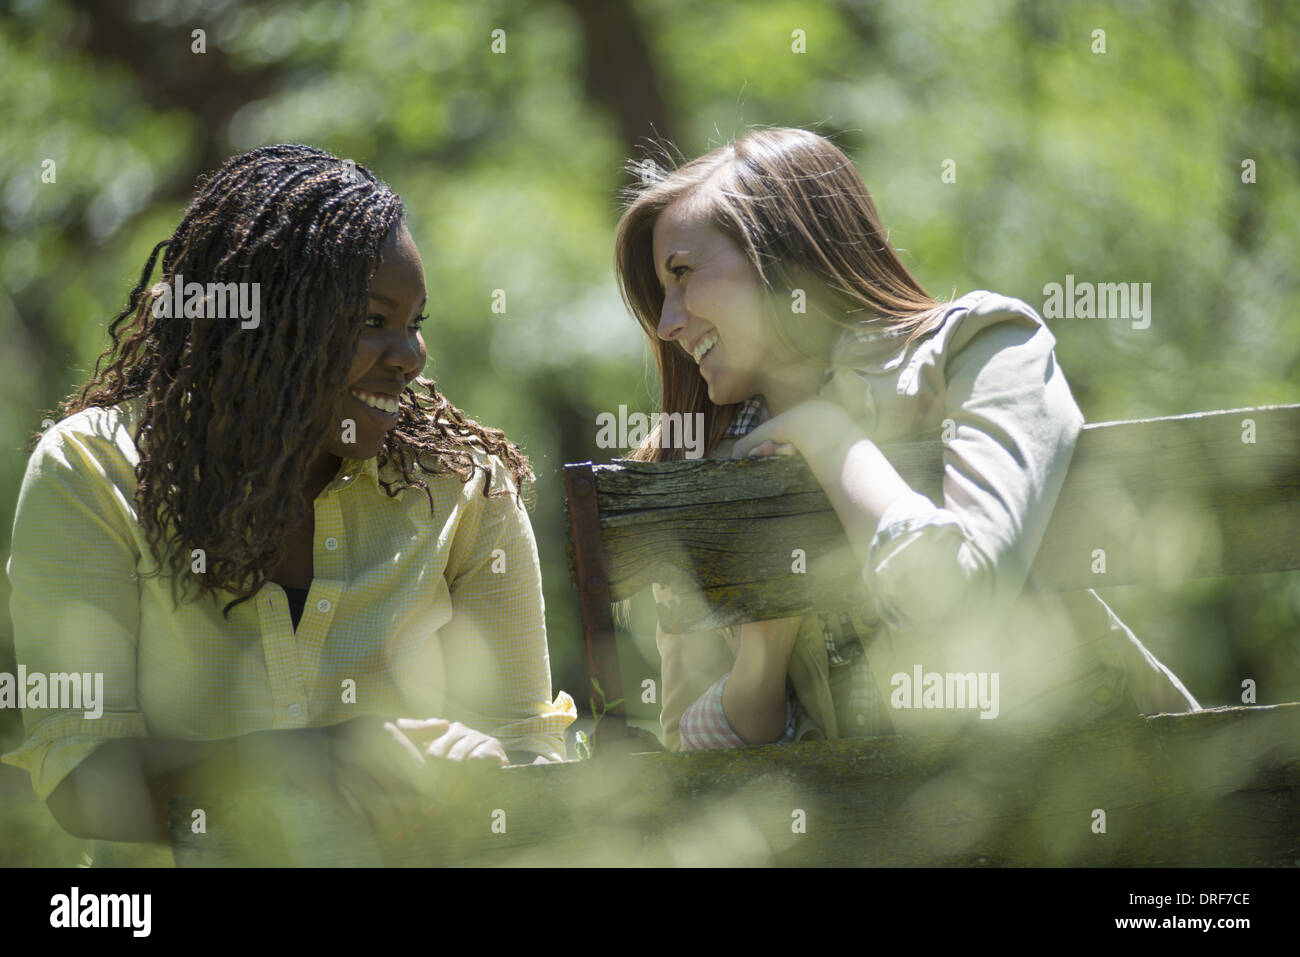 Utah USA Two young women talking to each other laughing Stock Photo